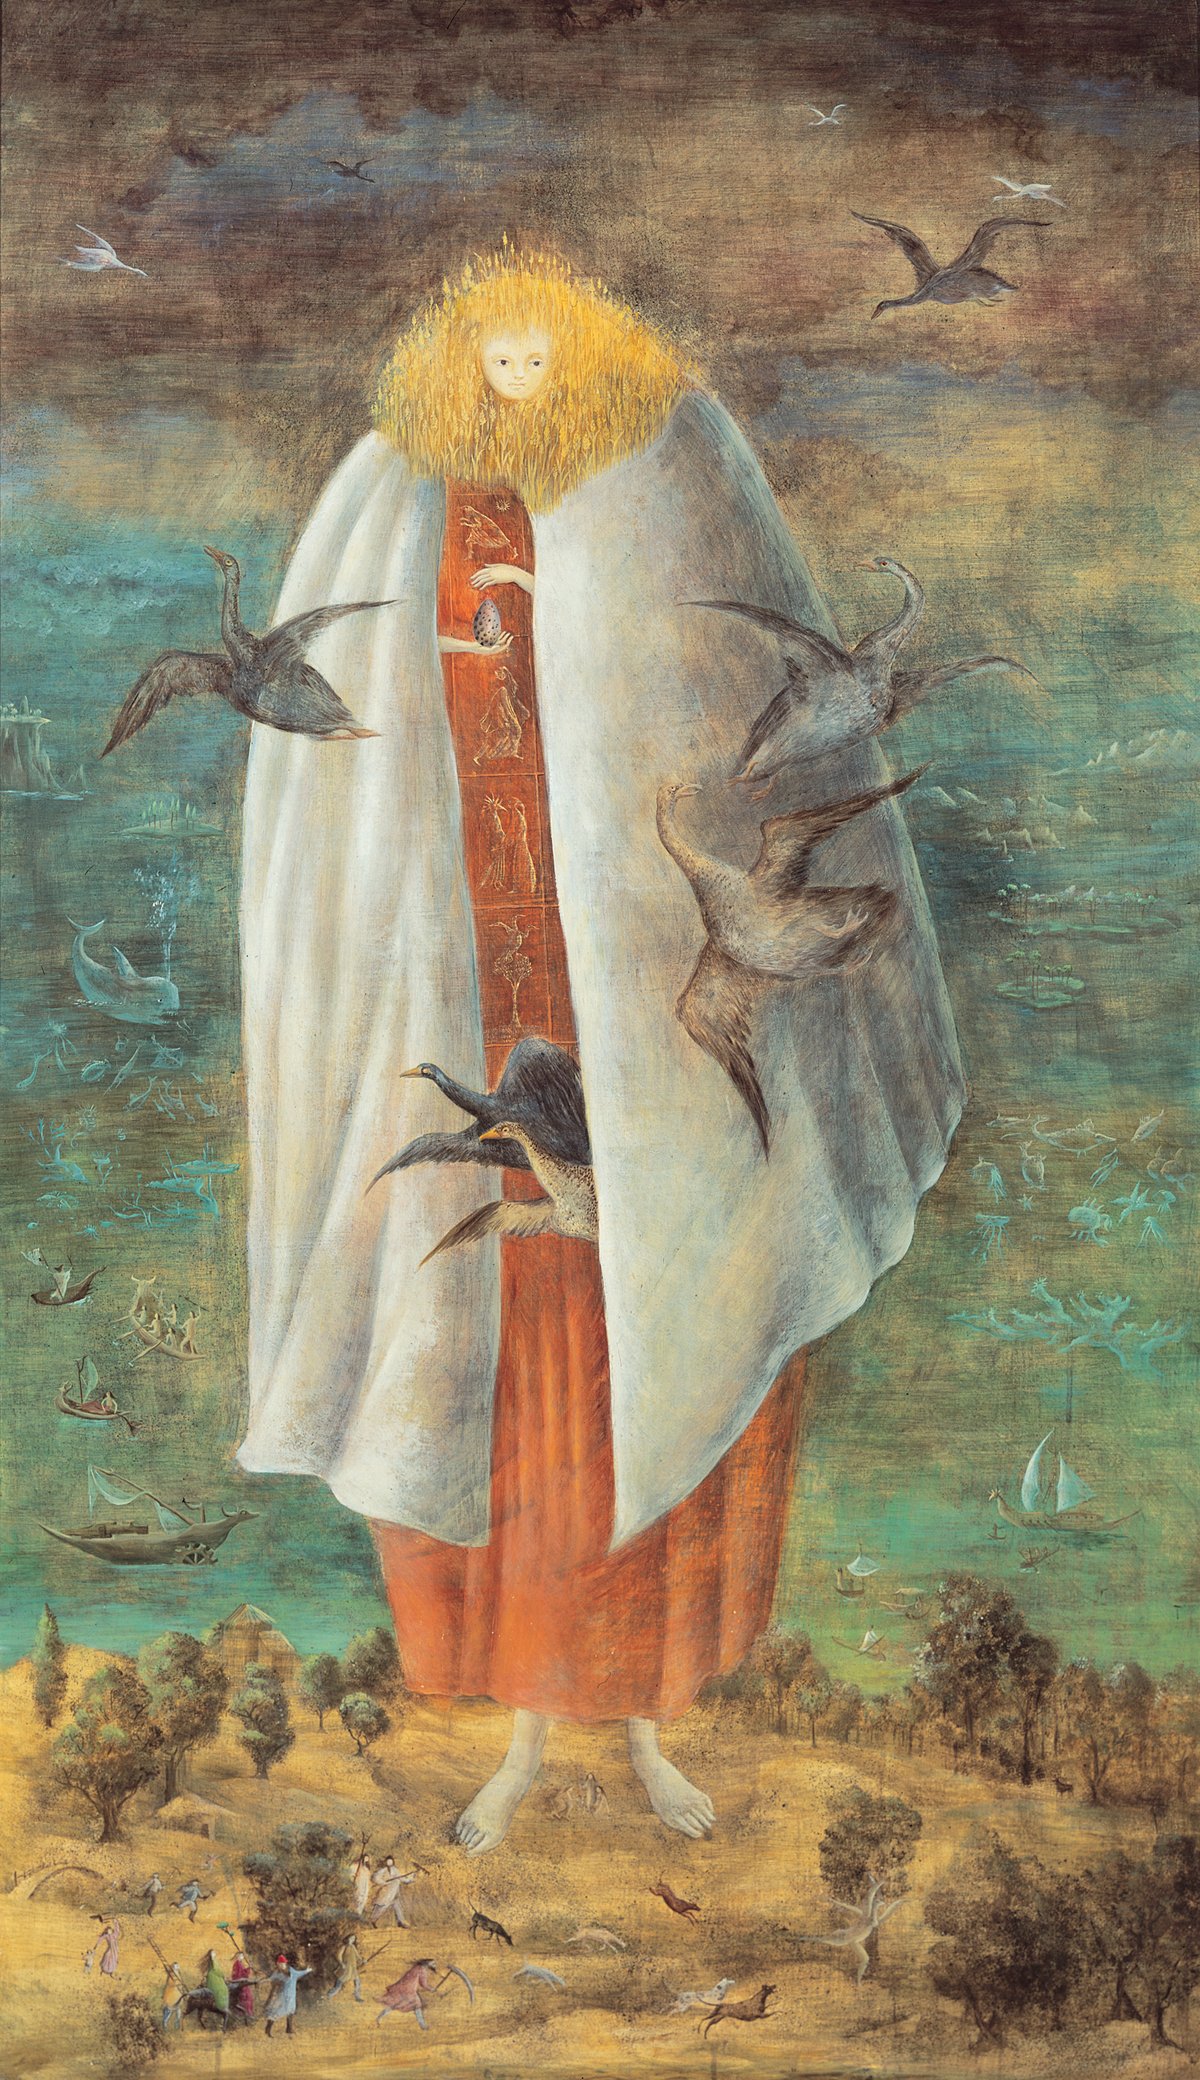 A giant woman standing dressed in red and white with birds circling around her.